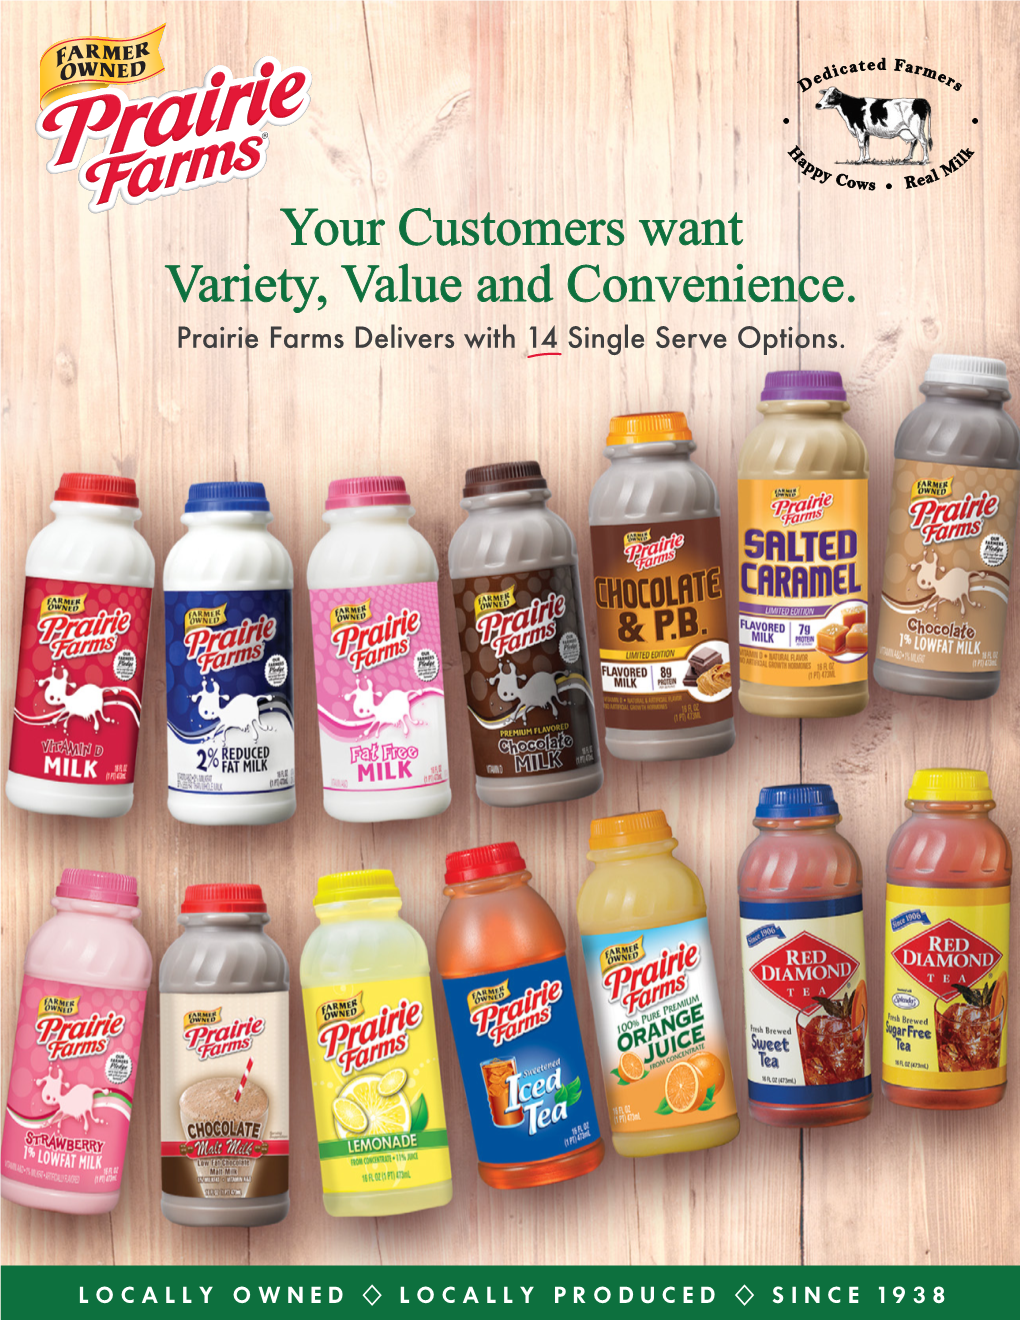 Your Customers Want Variety, Value and Convenience. Prairie Farms Delivers with 14 Single Serve Options